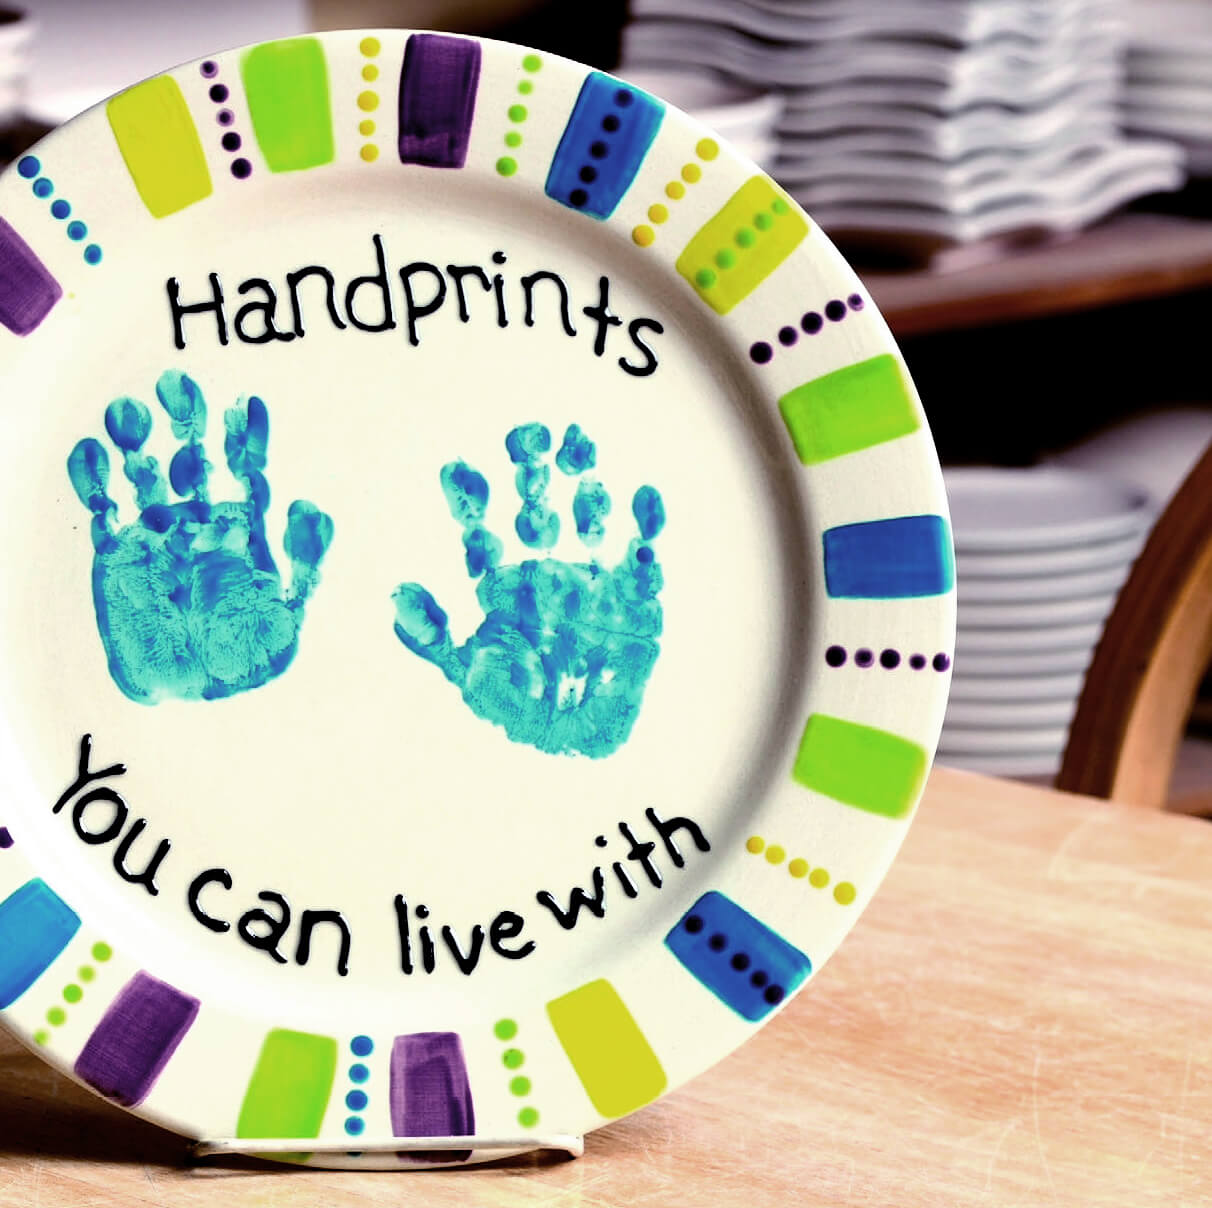 Make your own commemorative plates as gifts or memories